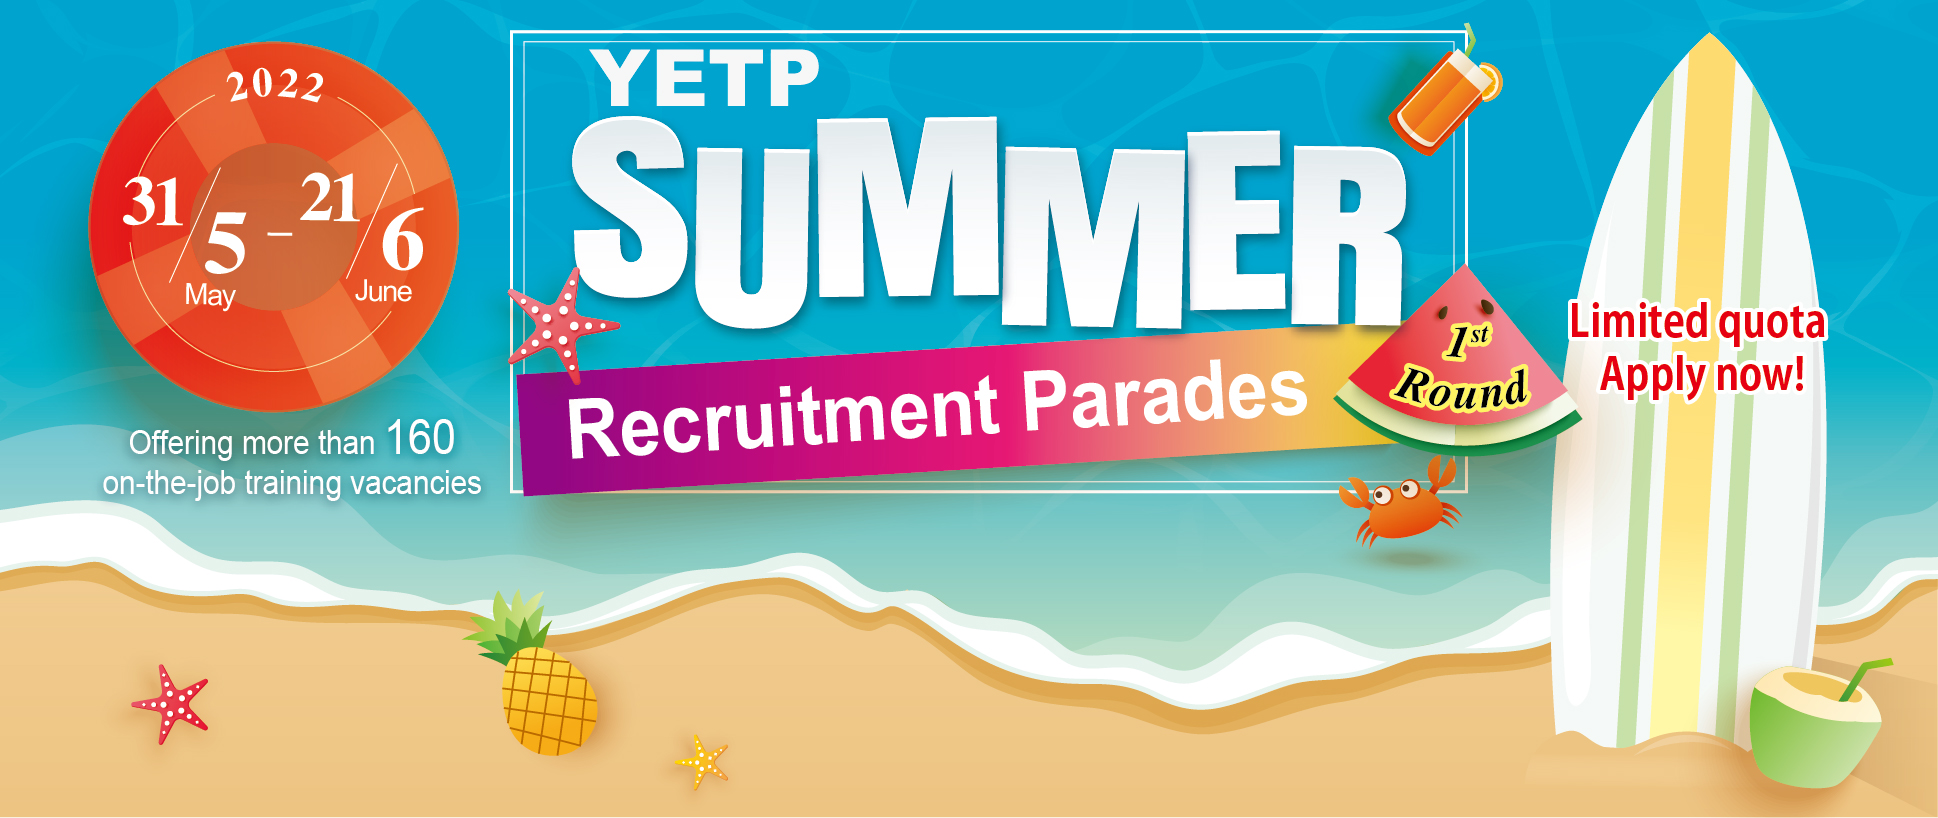 YETP Summer Recruitment Parades (First Round)(31 May 2022 to 21 June 2022)